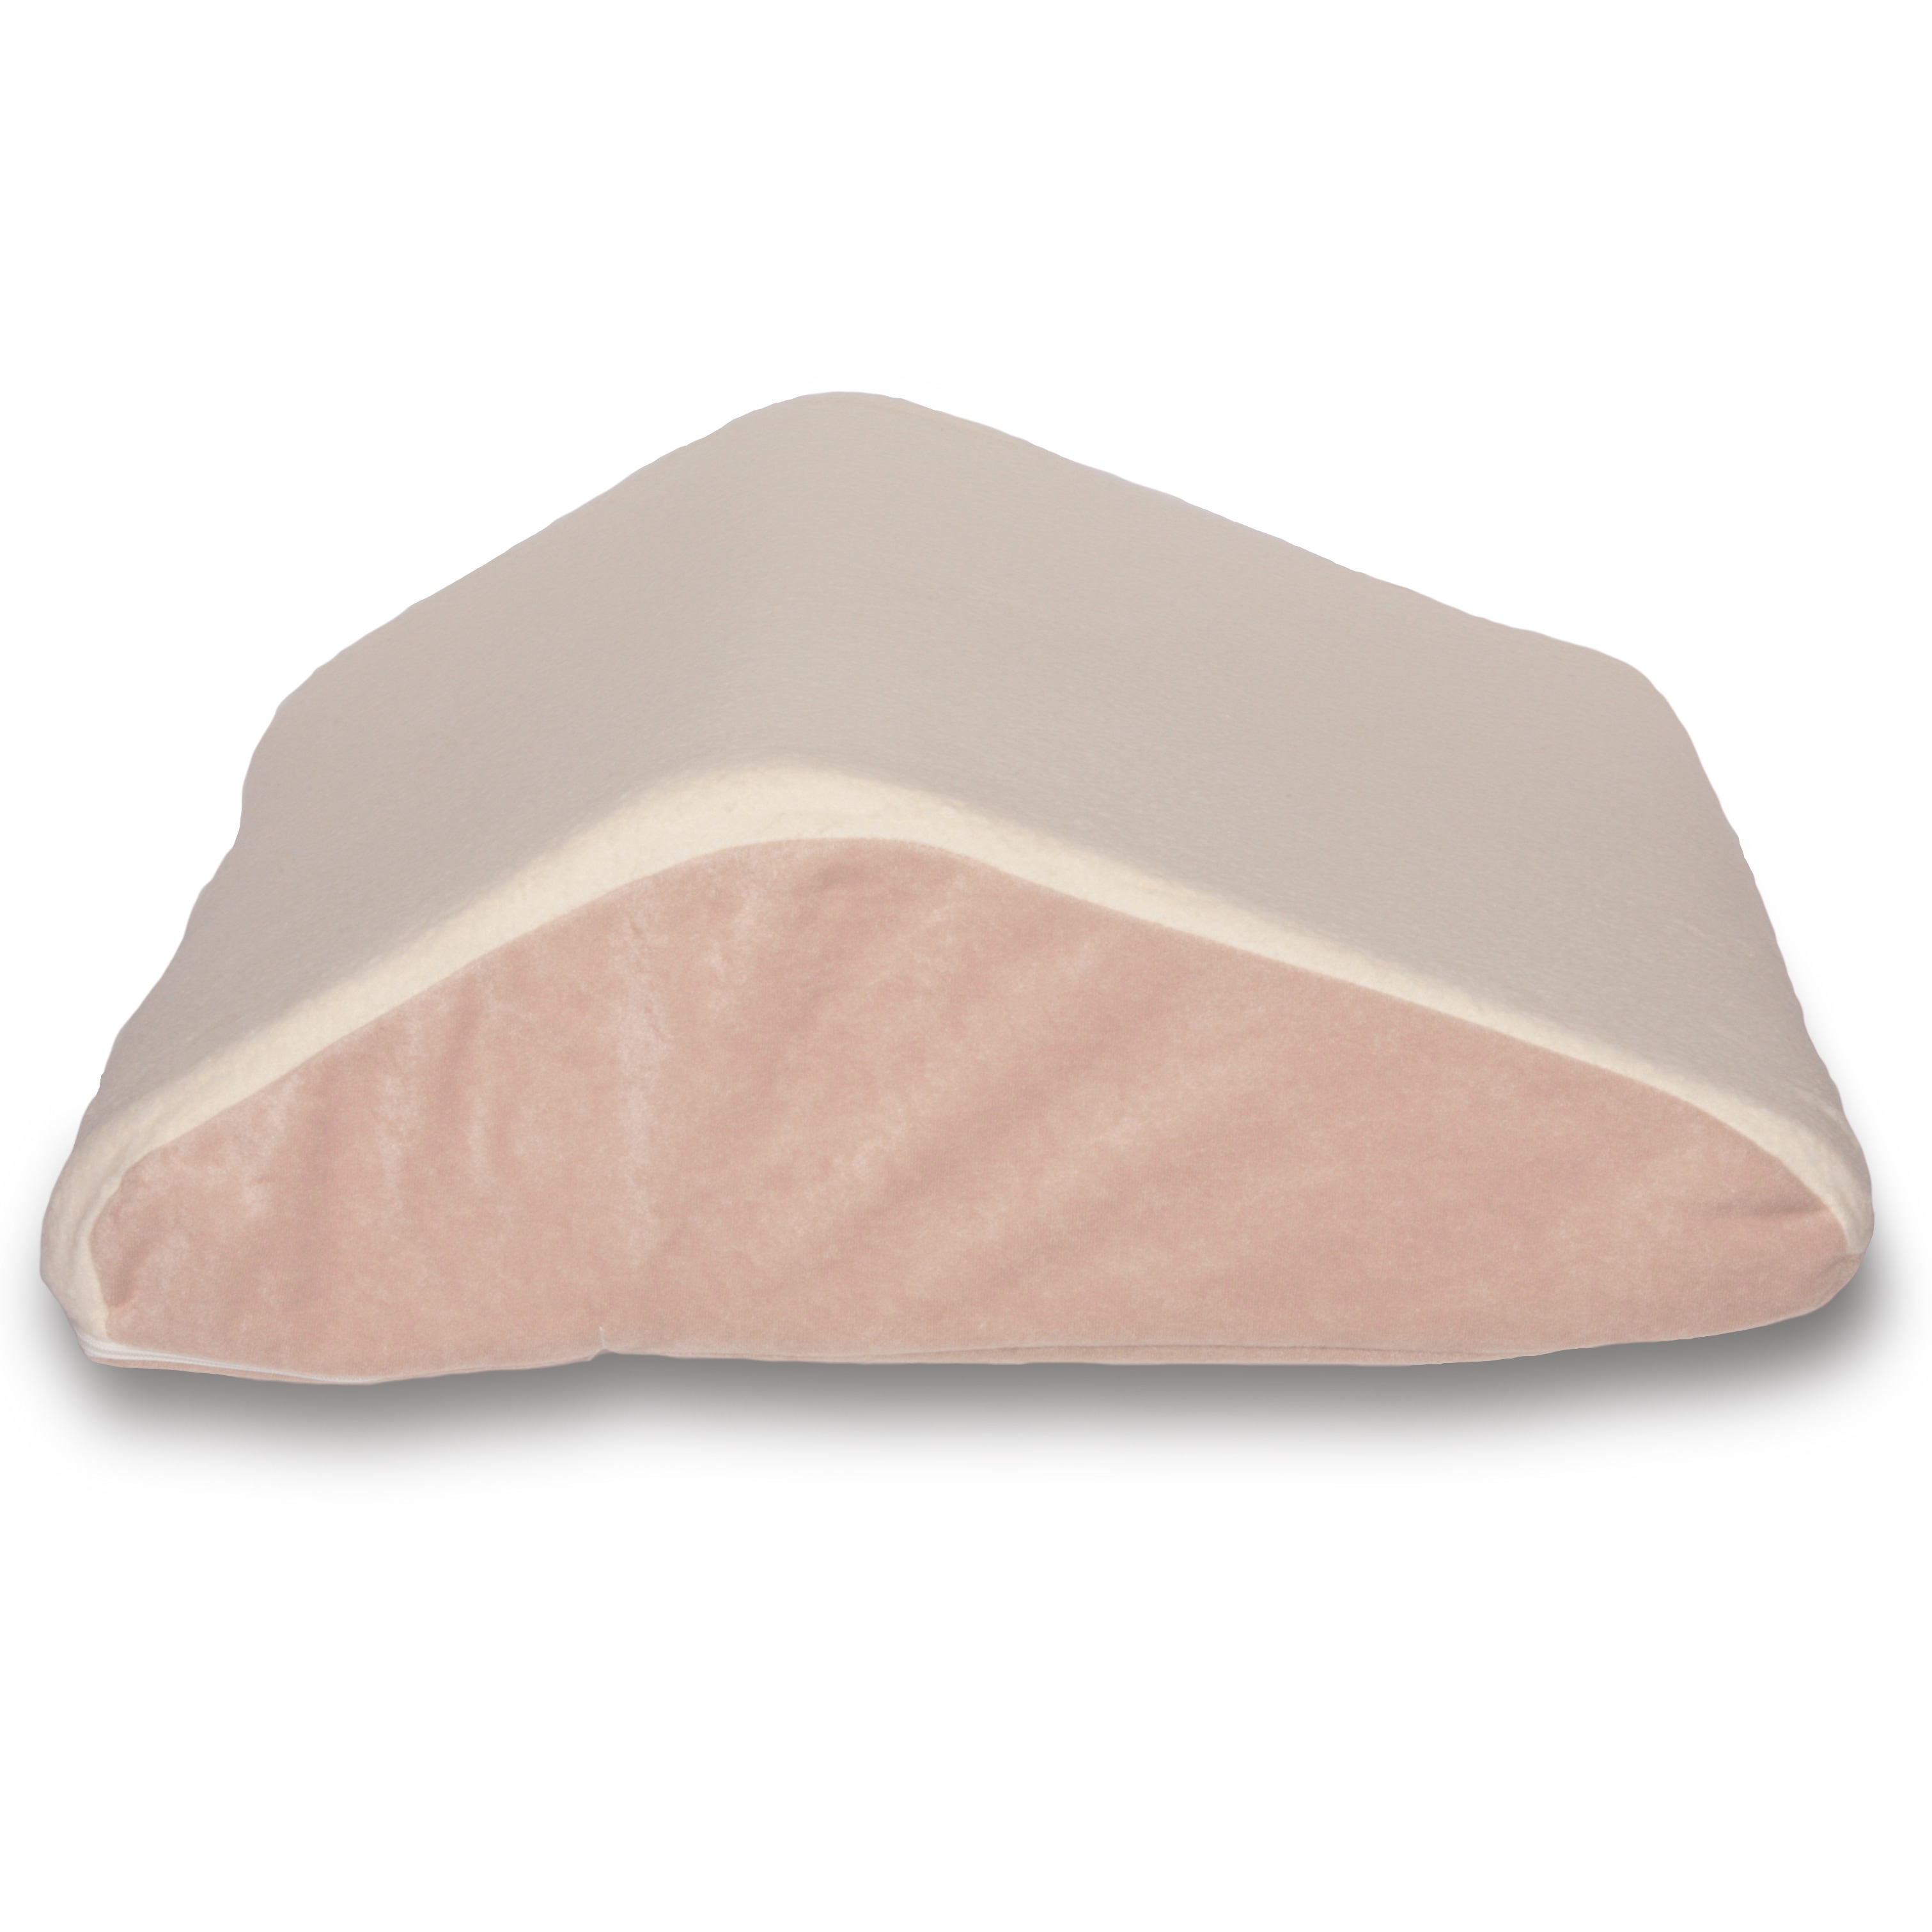 Sleepgram High Density Foam Contour Knee Pillow with Outer Cooling Cover, Gray